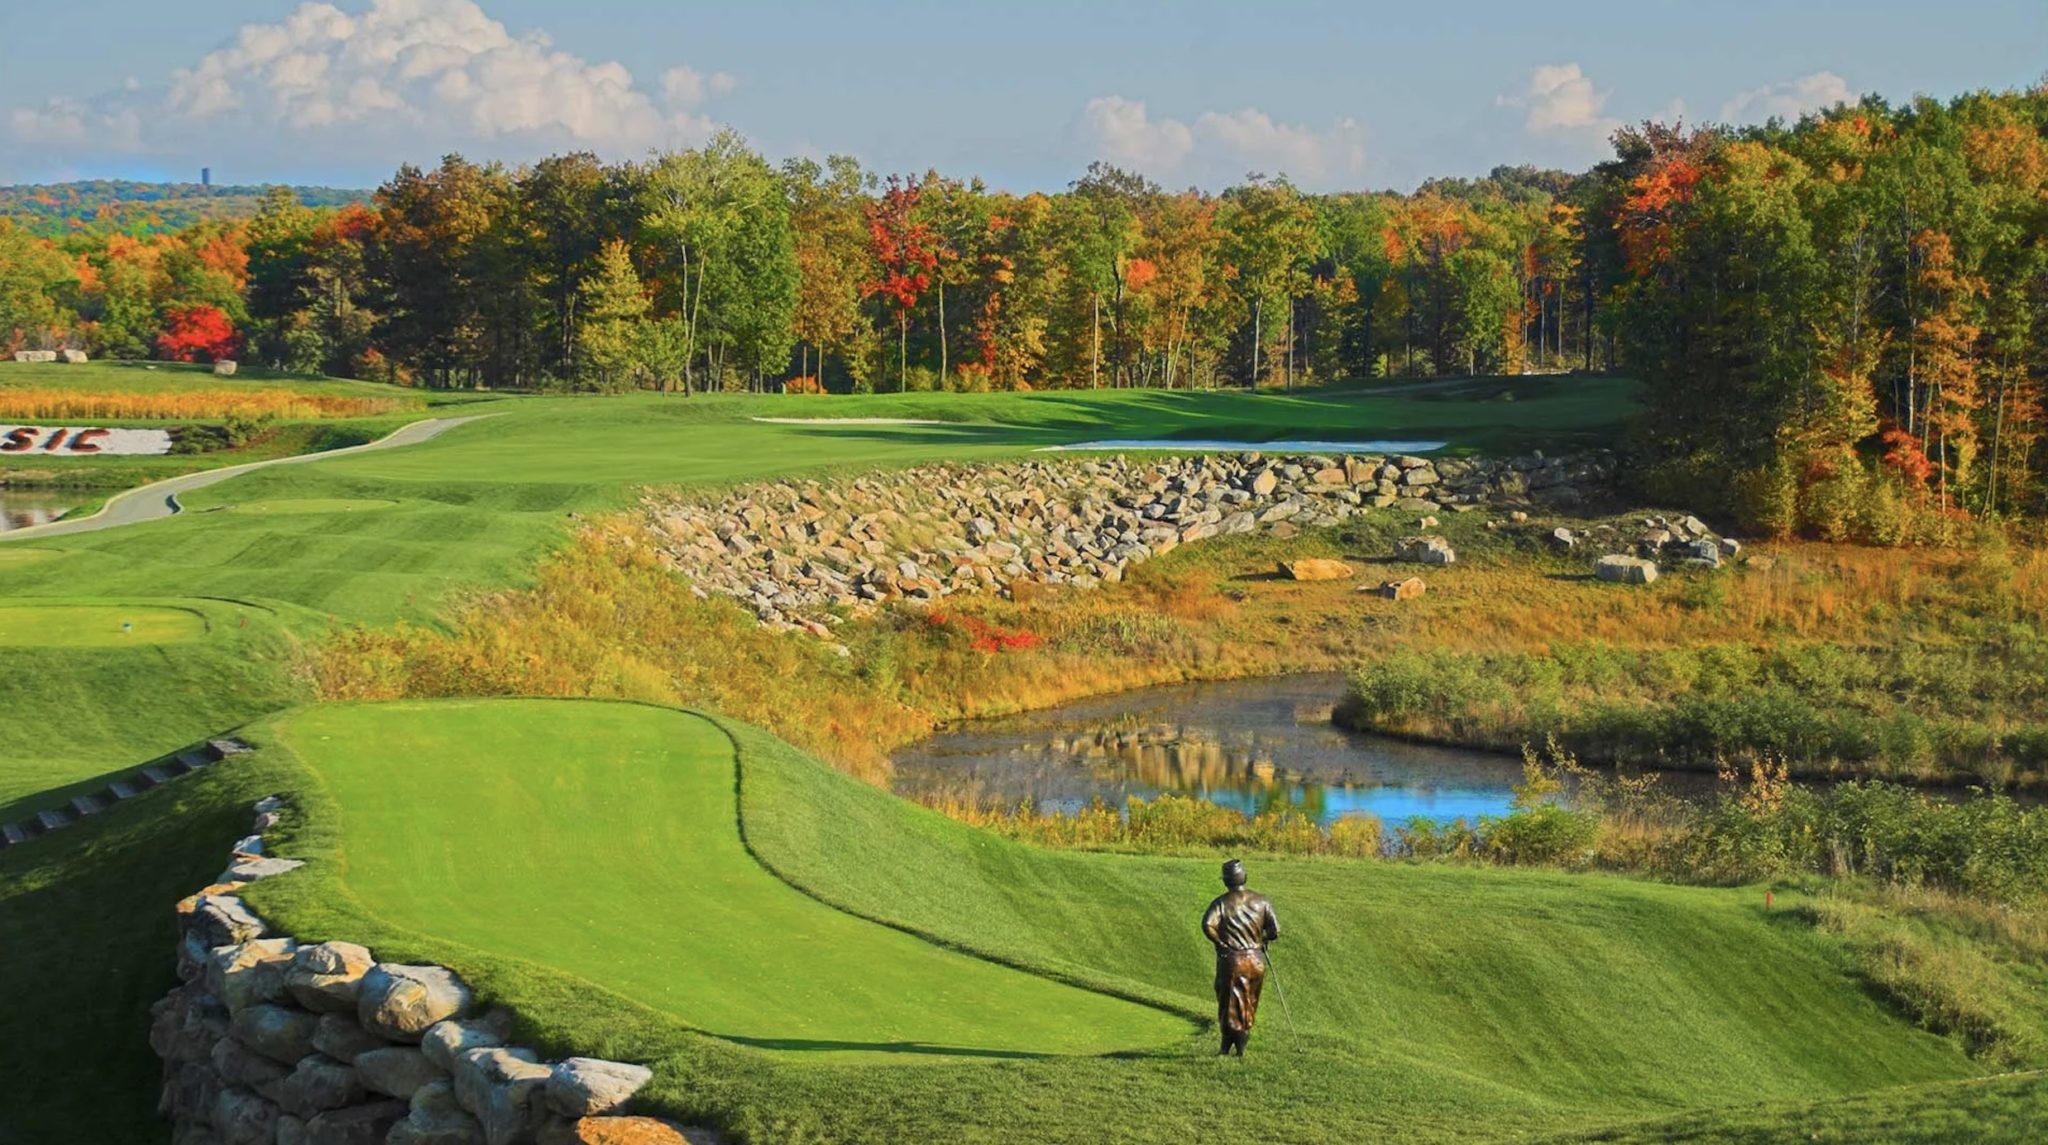 Tee Up for an Unforgettable Round at Nemacolin Resort Golf Course -